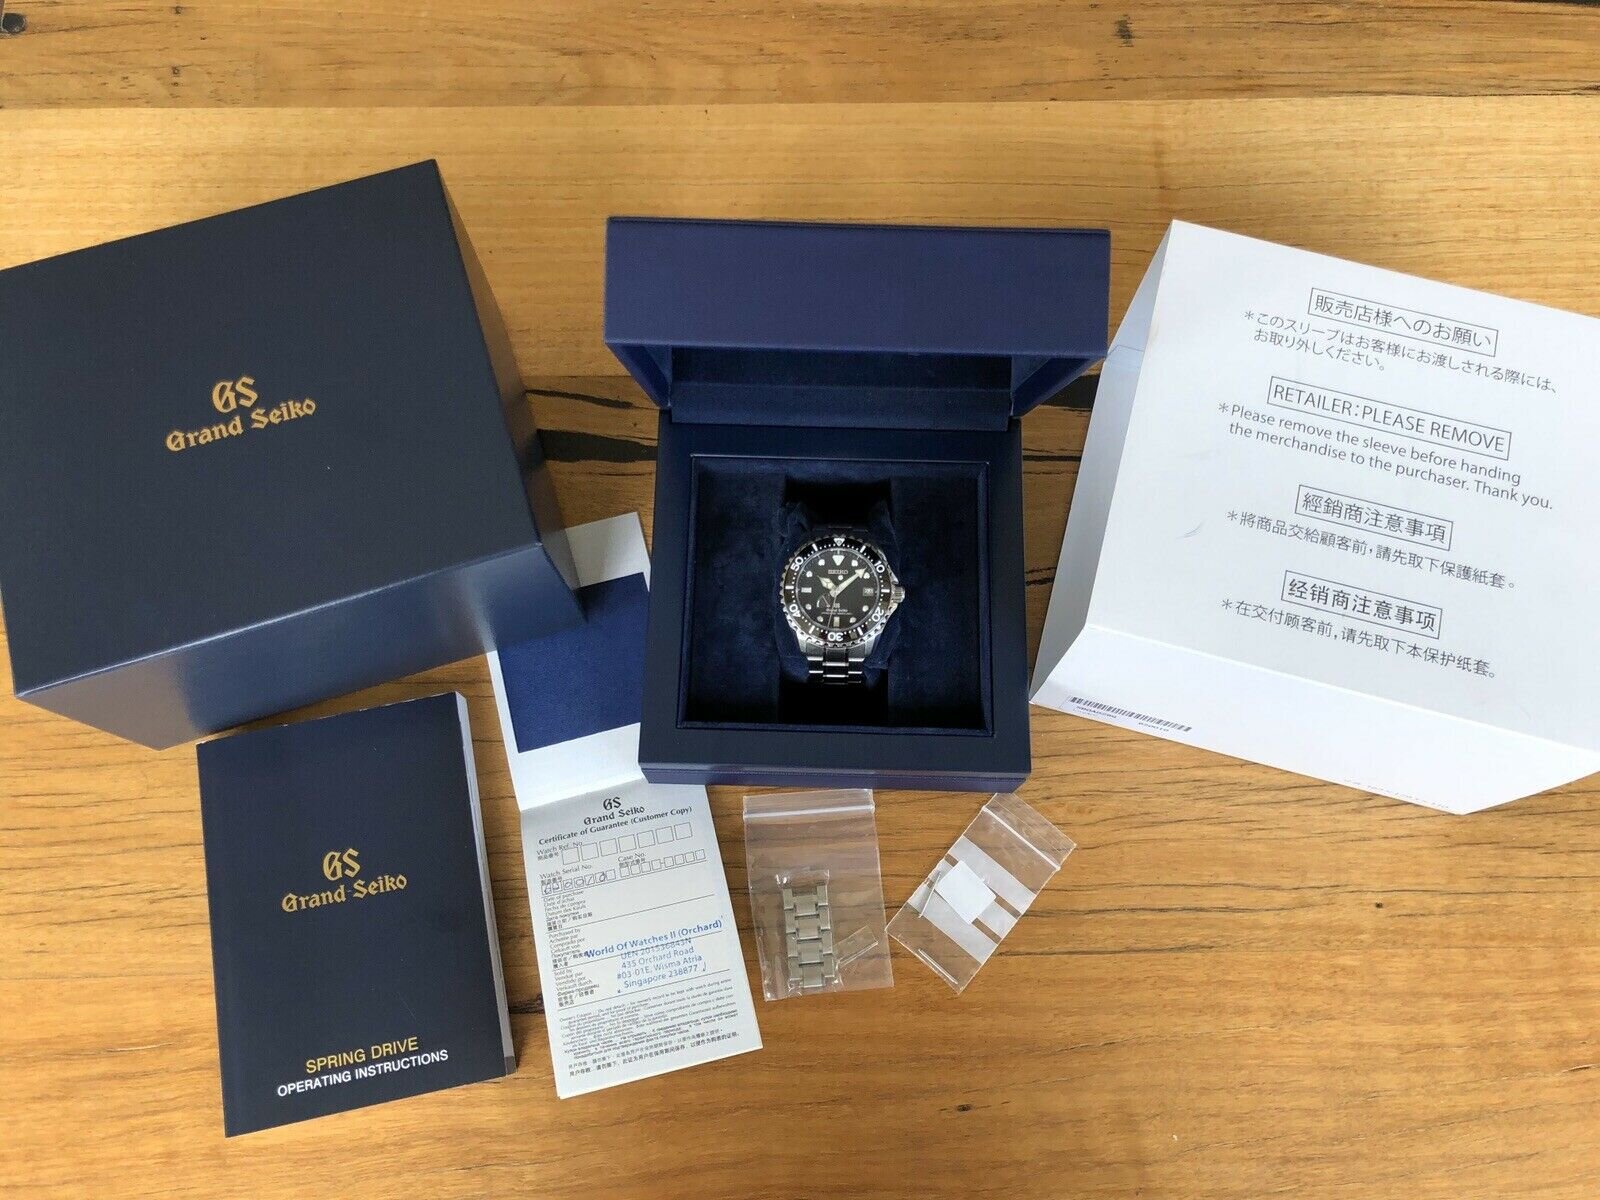 Seiko Grand Seiko SBGA029 Spring Drive - with box and papers — WATCH VAULT